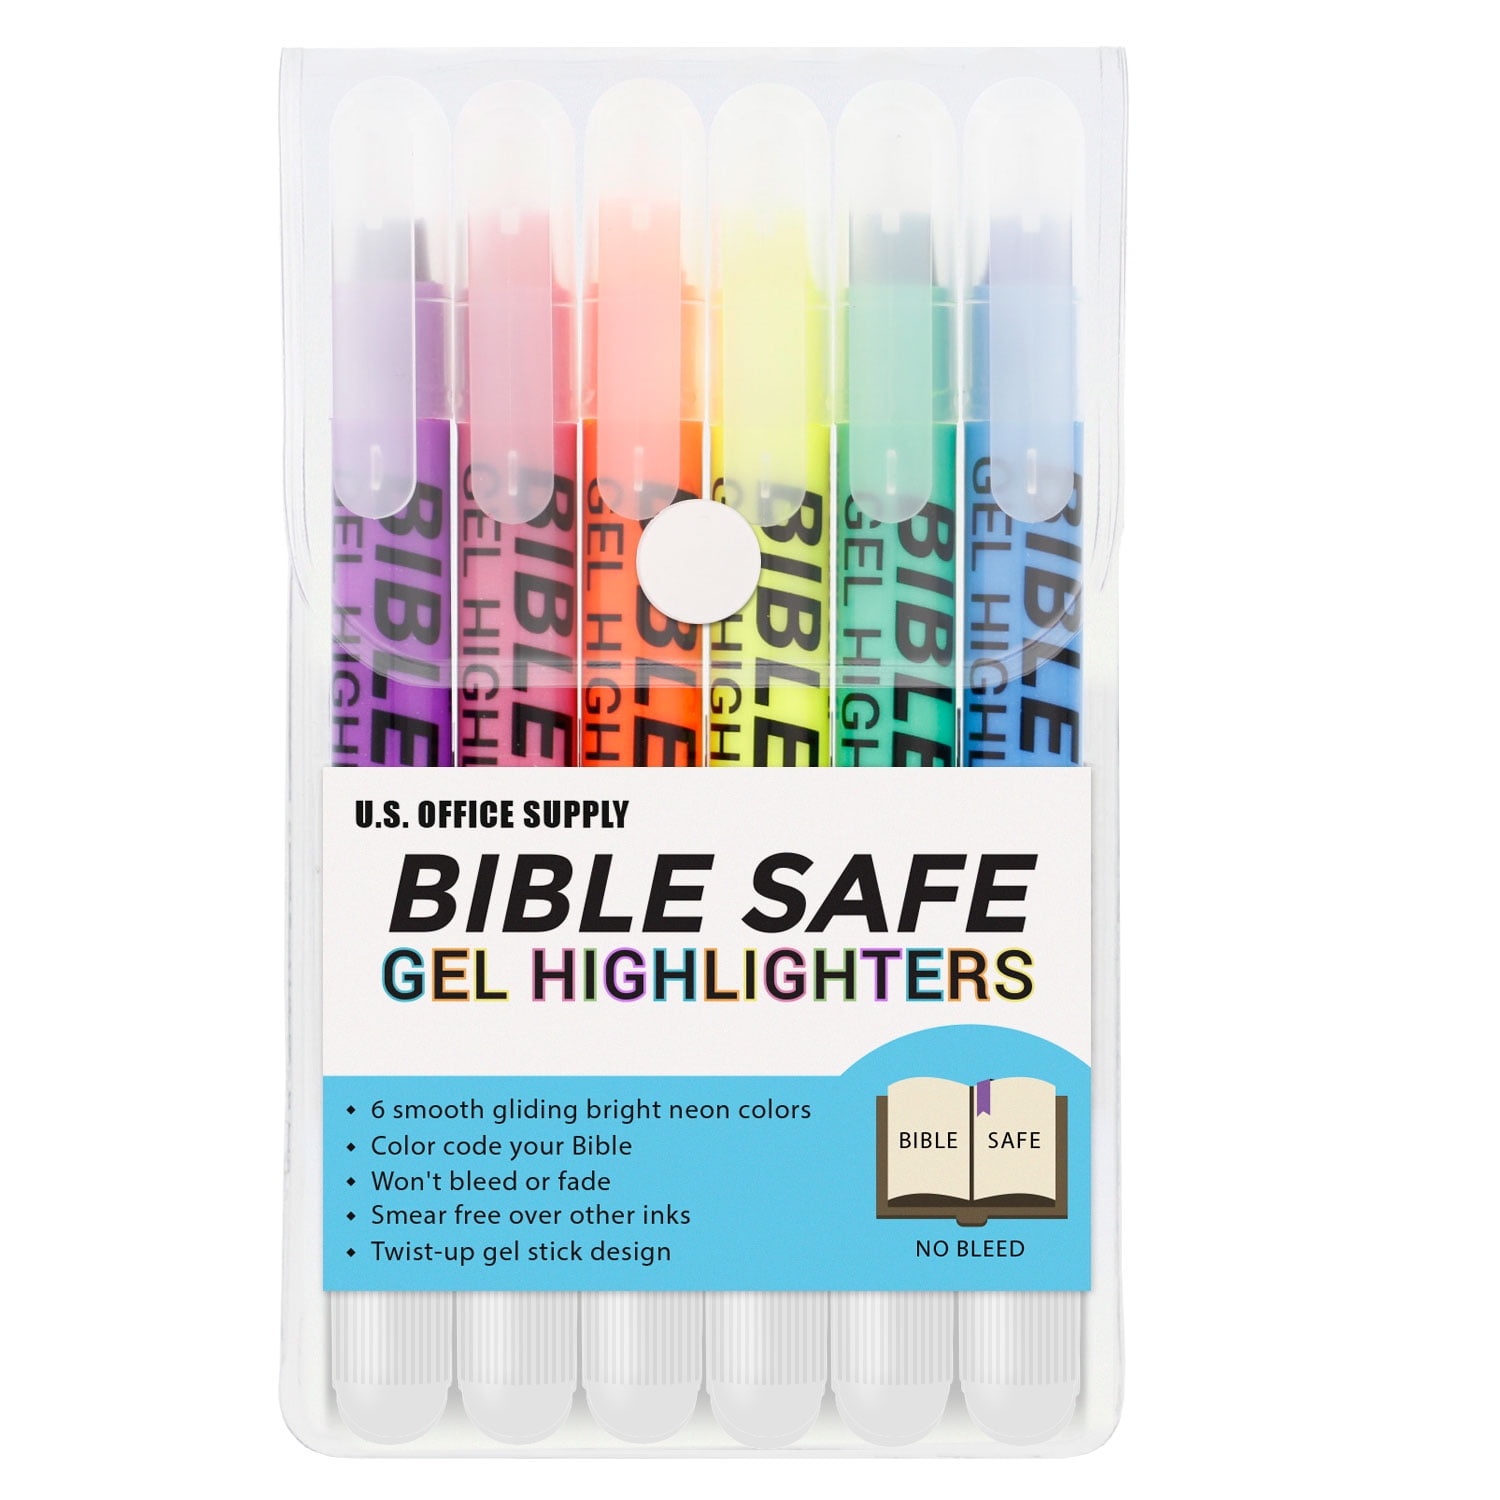 Highlighter Markers for Adults Kids Highlighting in the Home School Office  U4LD - AliExpress